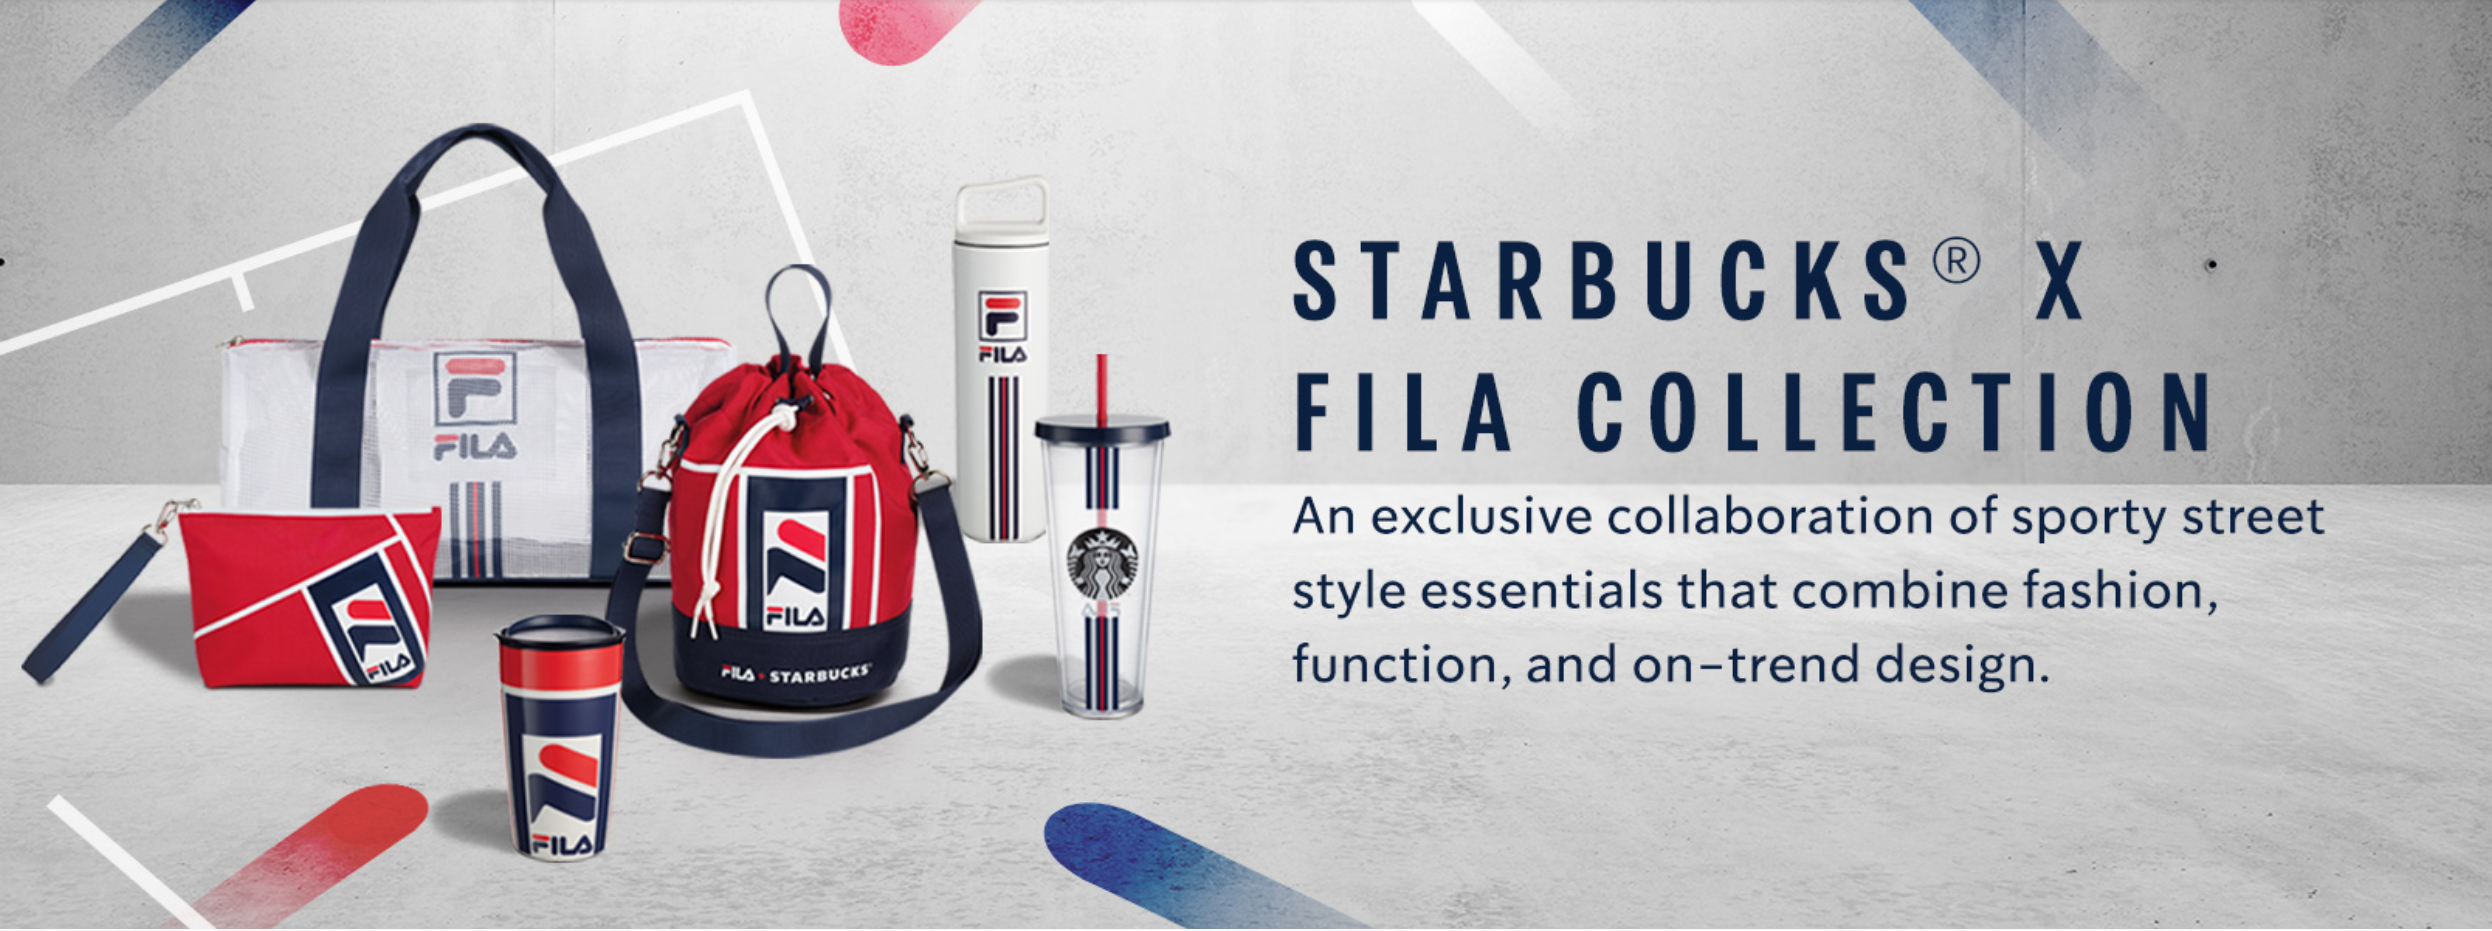 Starbucks x FILA Bags, Drinkwares and Wearable Items To Be Available From 23 July 2021